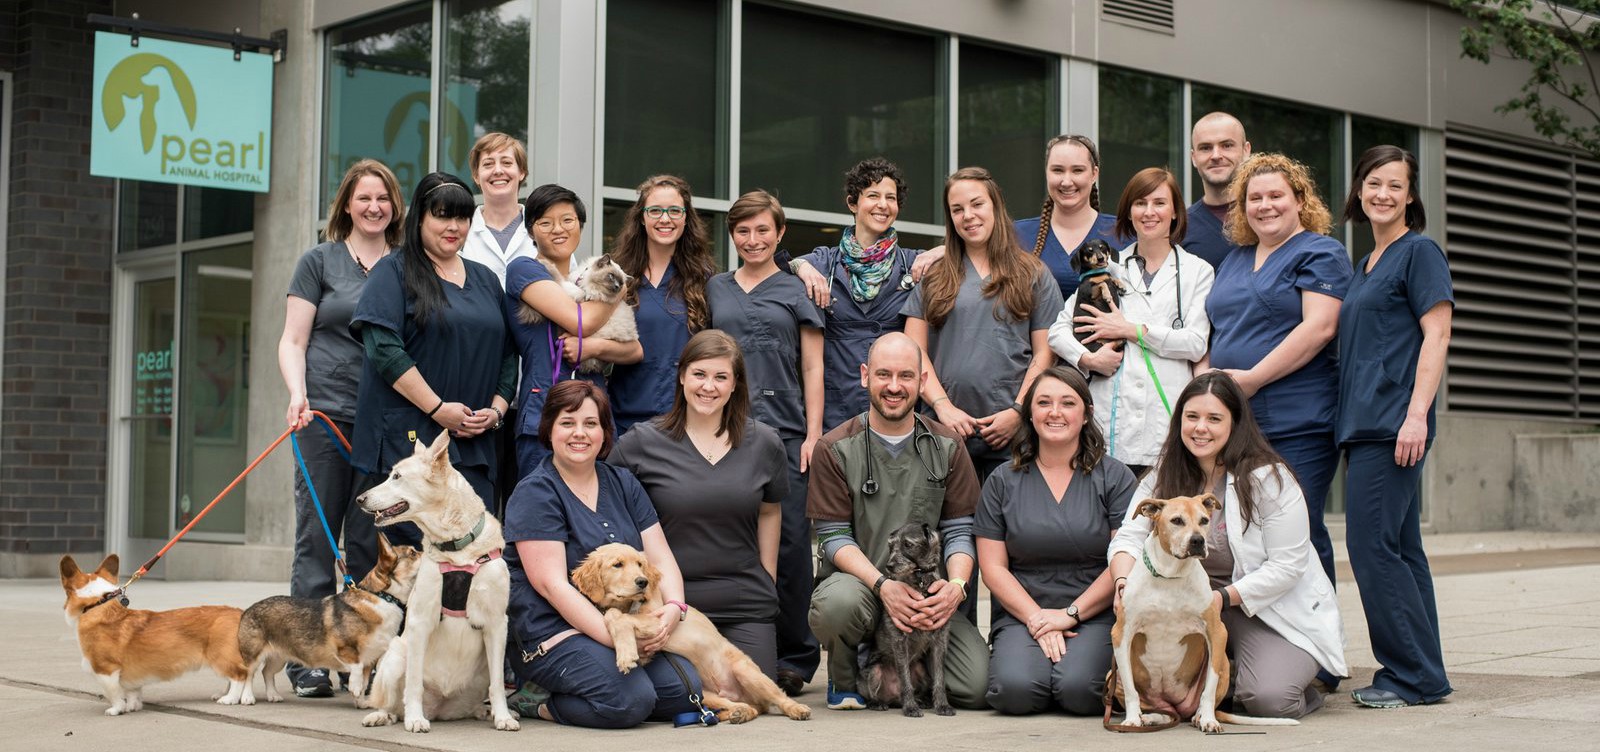 Veterinarians, technicians, and staff at Pearl Animal Hospital